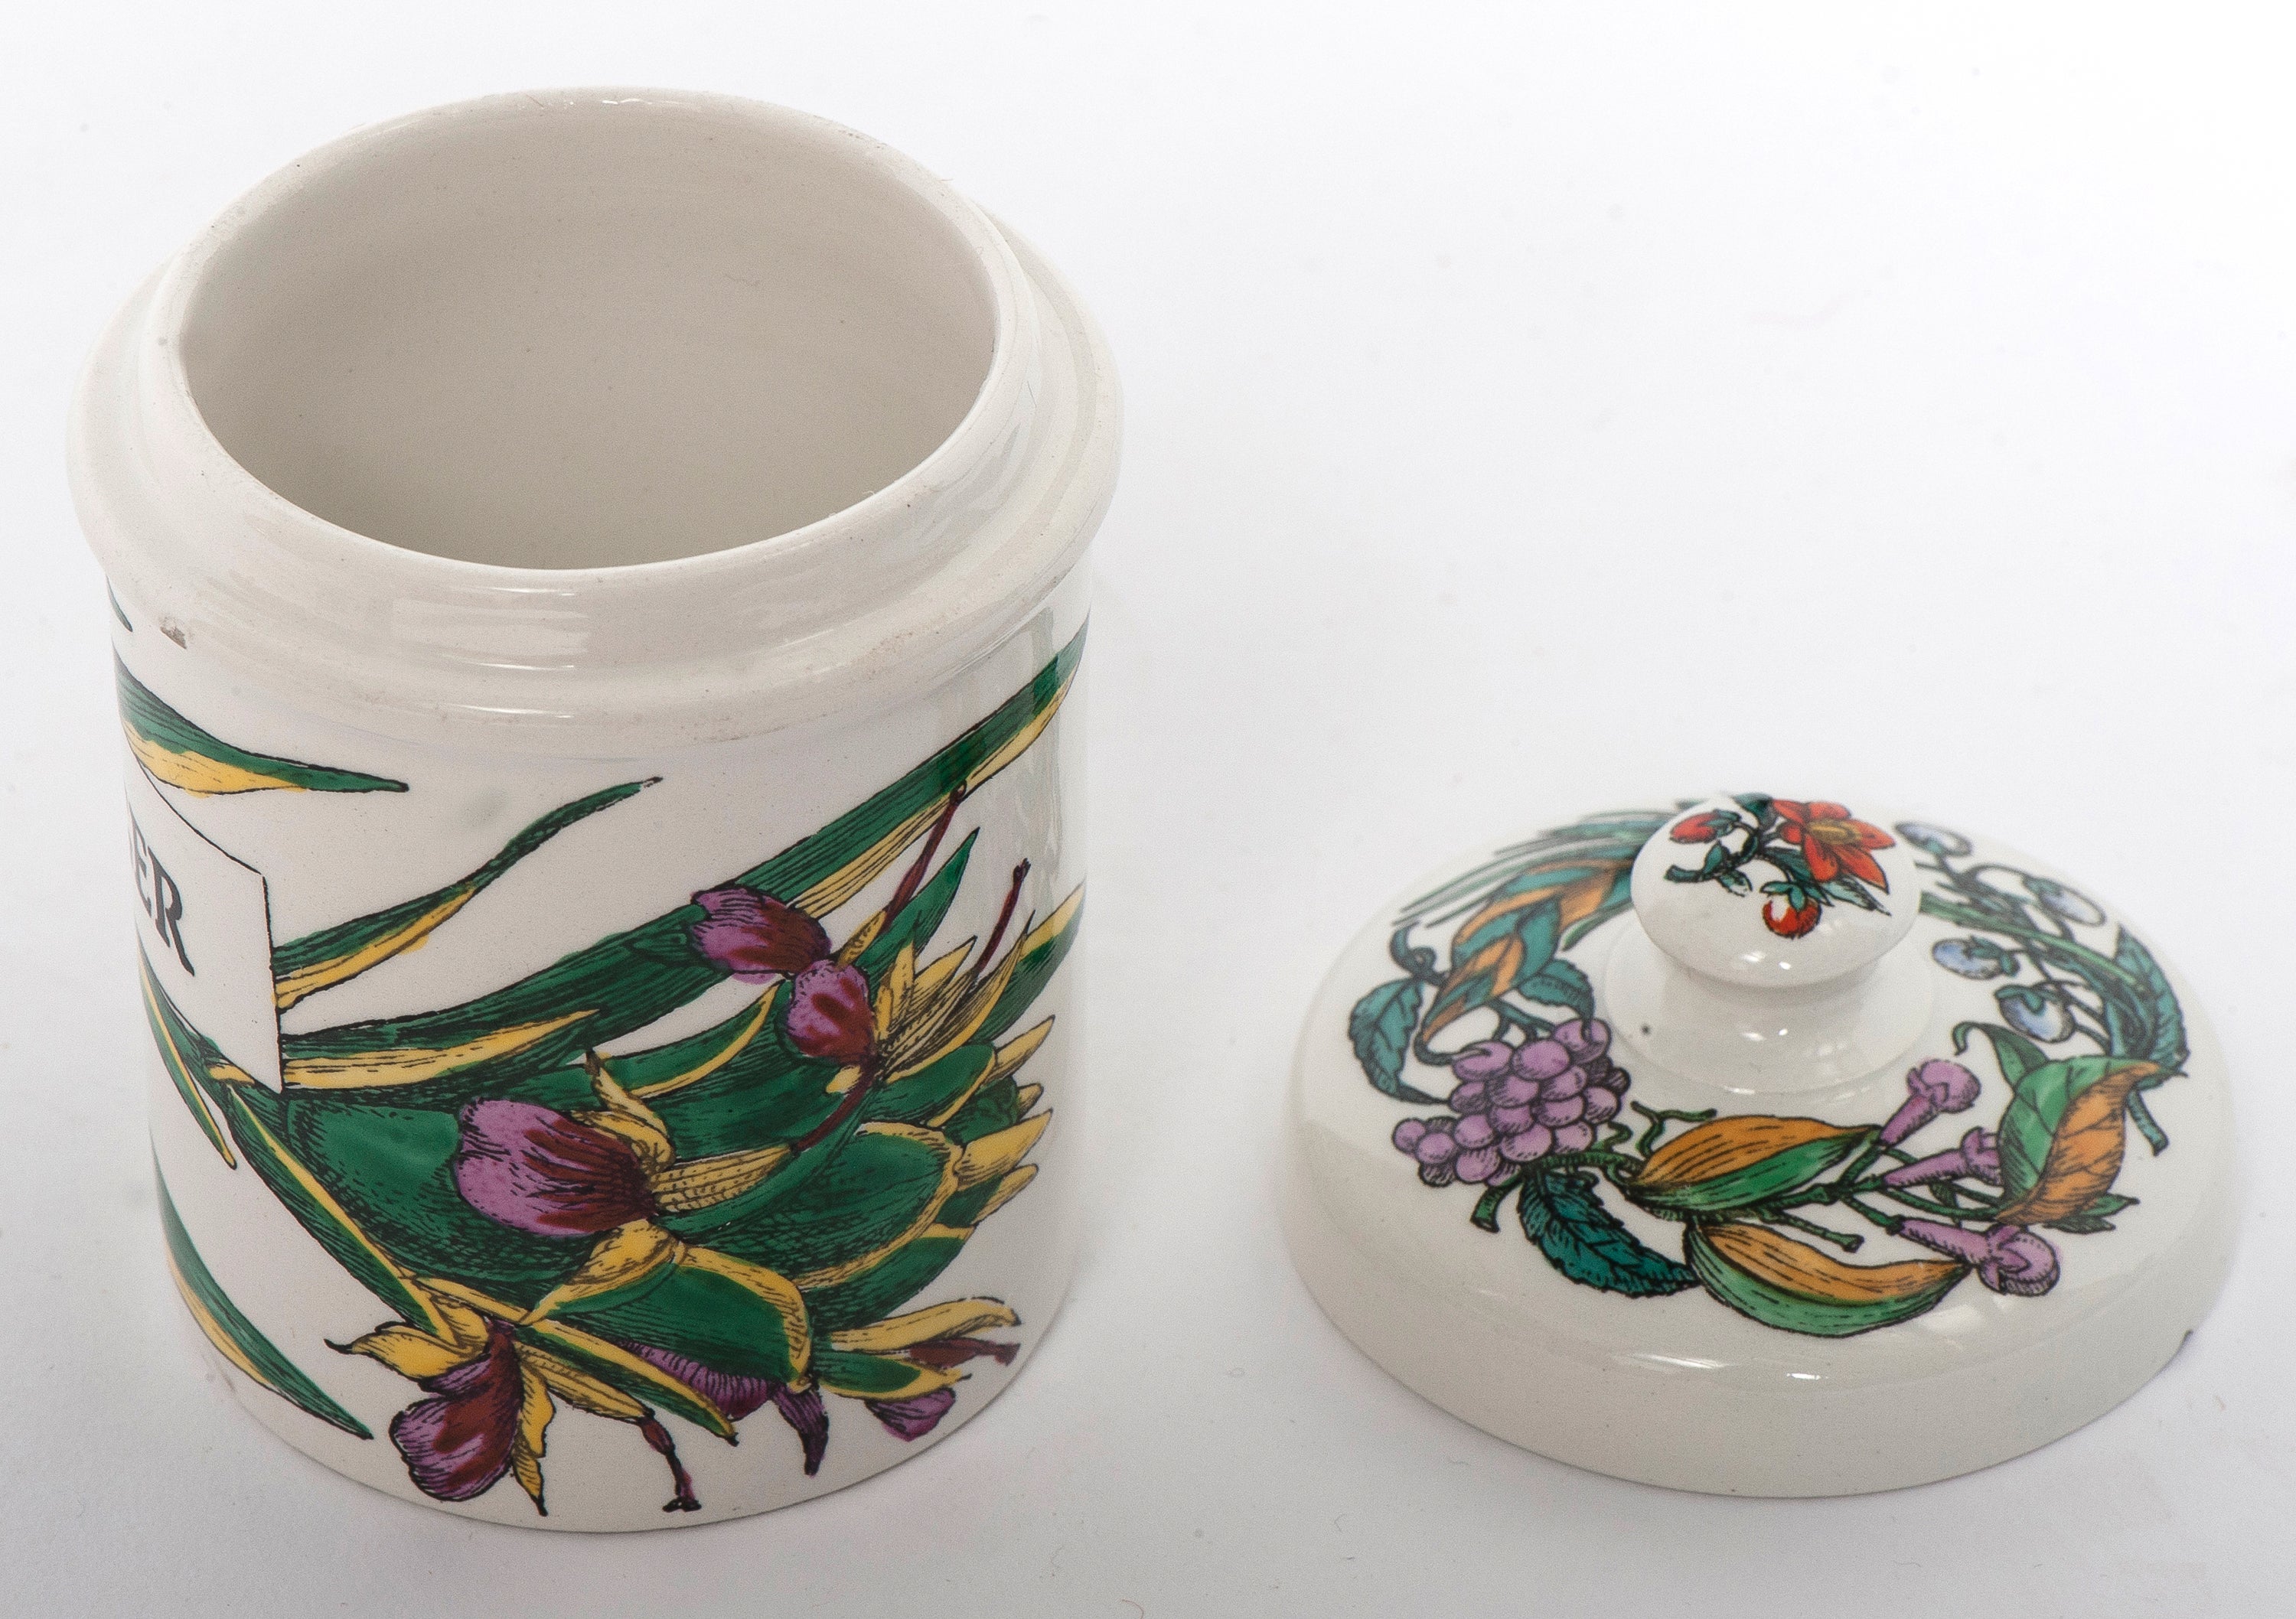 Piero Fornasetti porcelain ginger jar with cover, Italy circa 1960 In Excellent Condition For Sale In Macclesfield, Cheshire